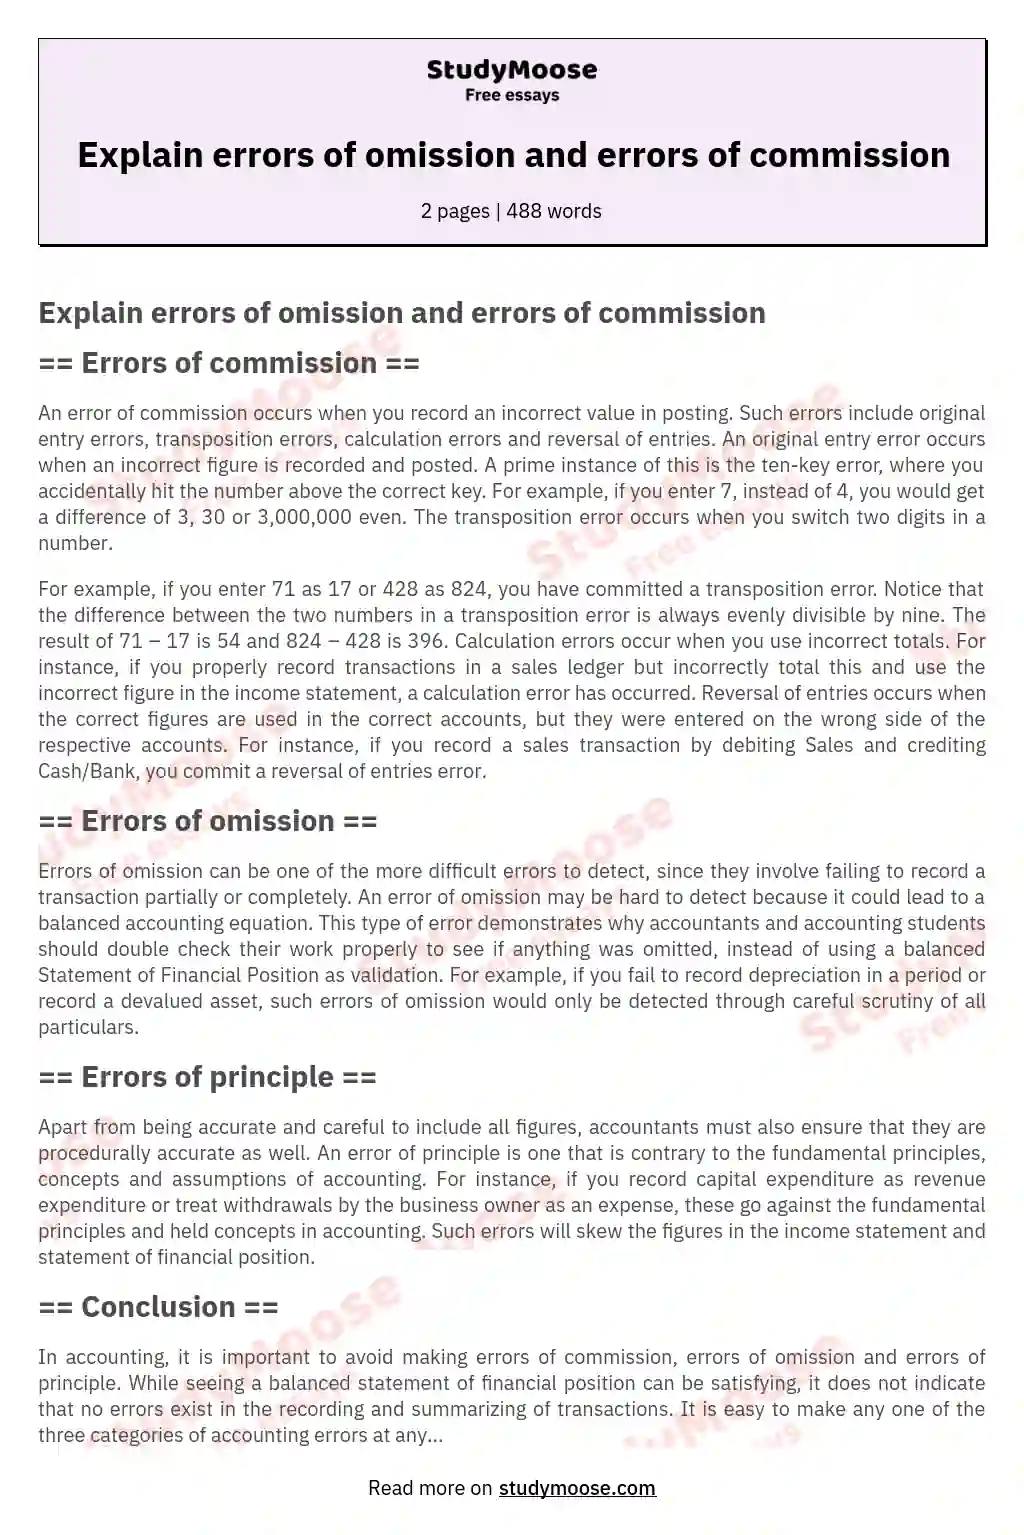 Explain errors of omission and errors of commission essay